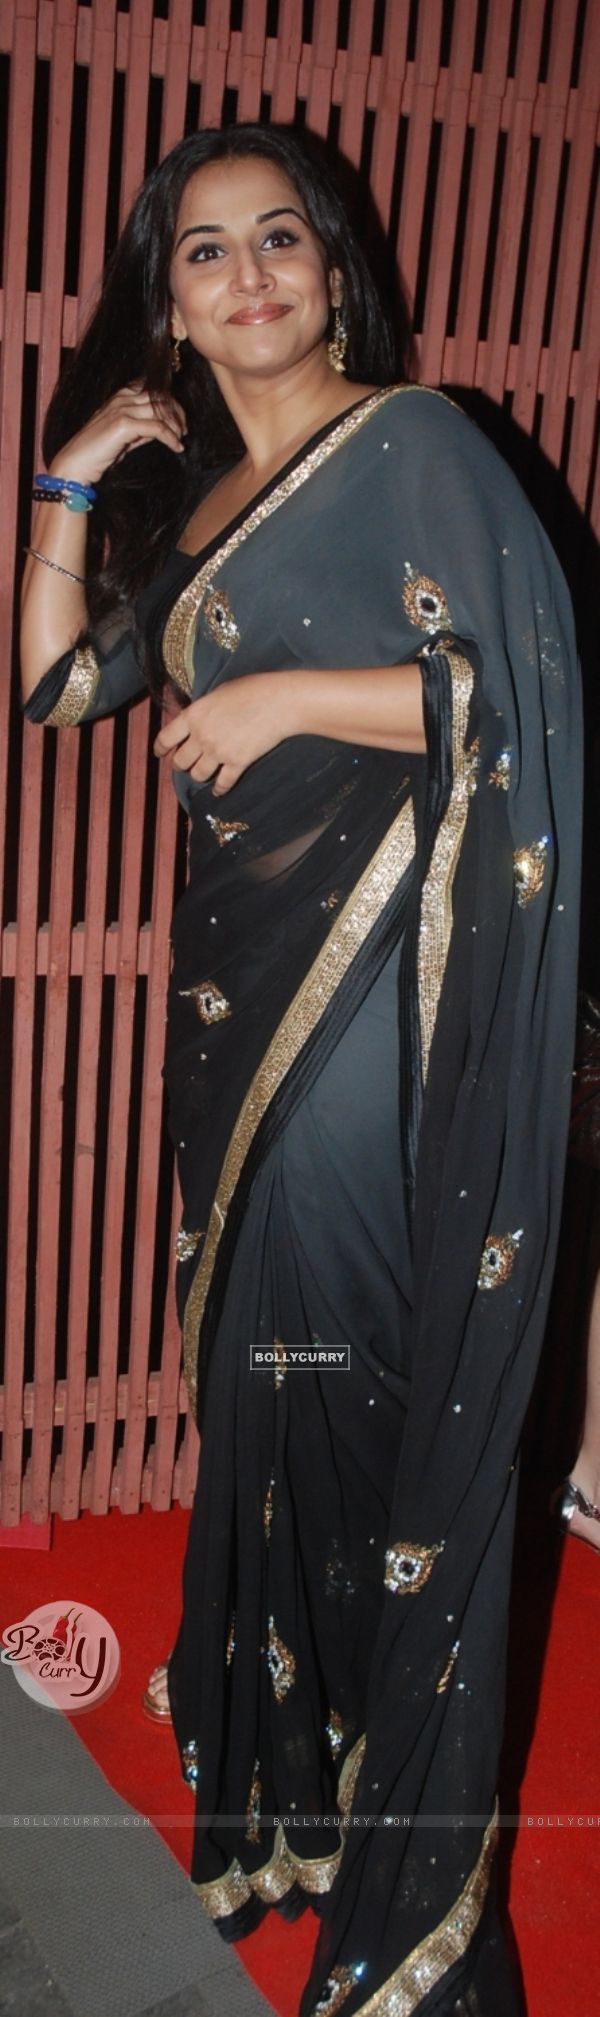 Vidya Balan at The Dirty Picture success party (174723)